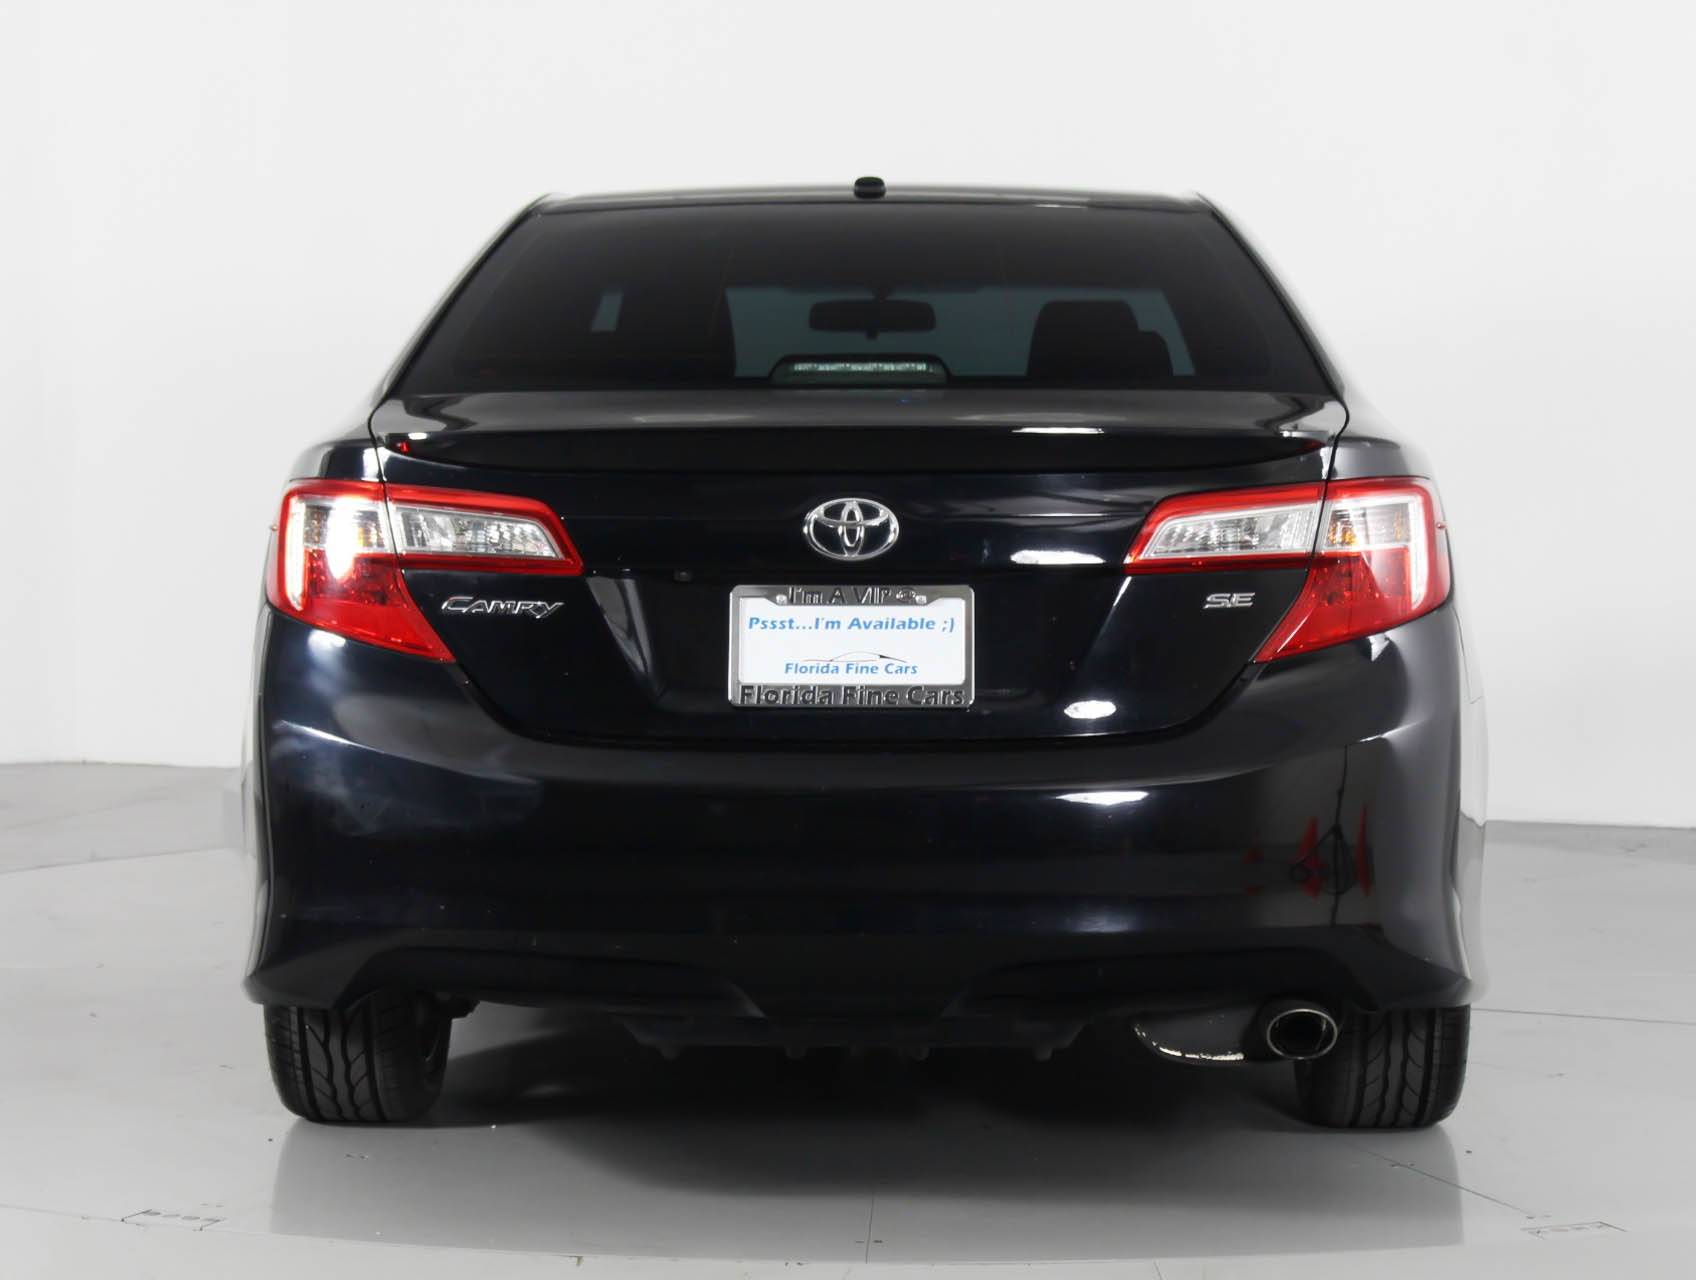 Florida Fine Cars - Used TOYOTA CAMRY 2014 WEST PALM Se Sport